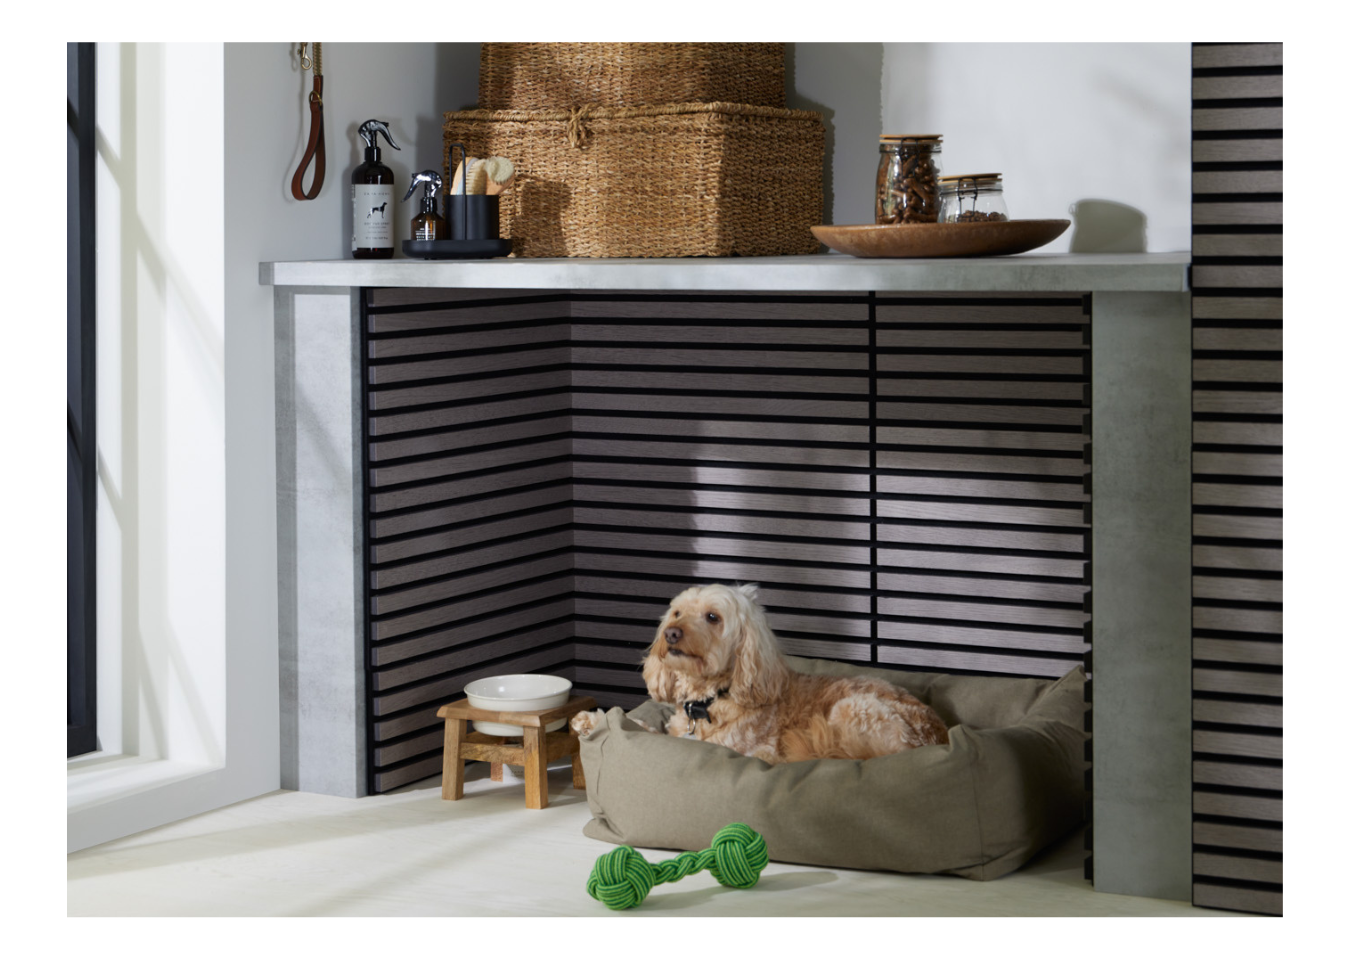 SlatWall Mini Grey Oak panels in a utility room alcove where a beige mixed-breed dog lies in a green bed next to a food bowl.